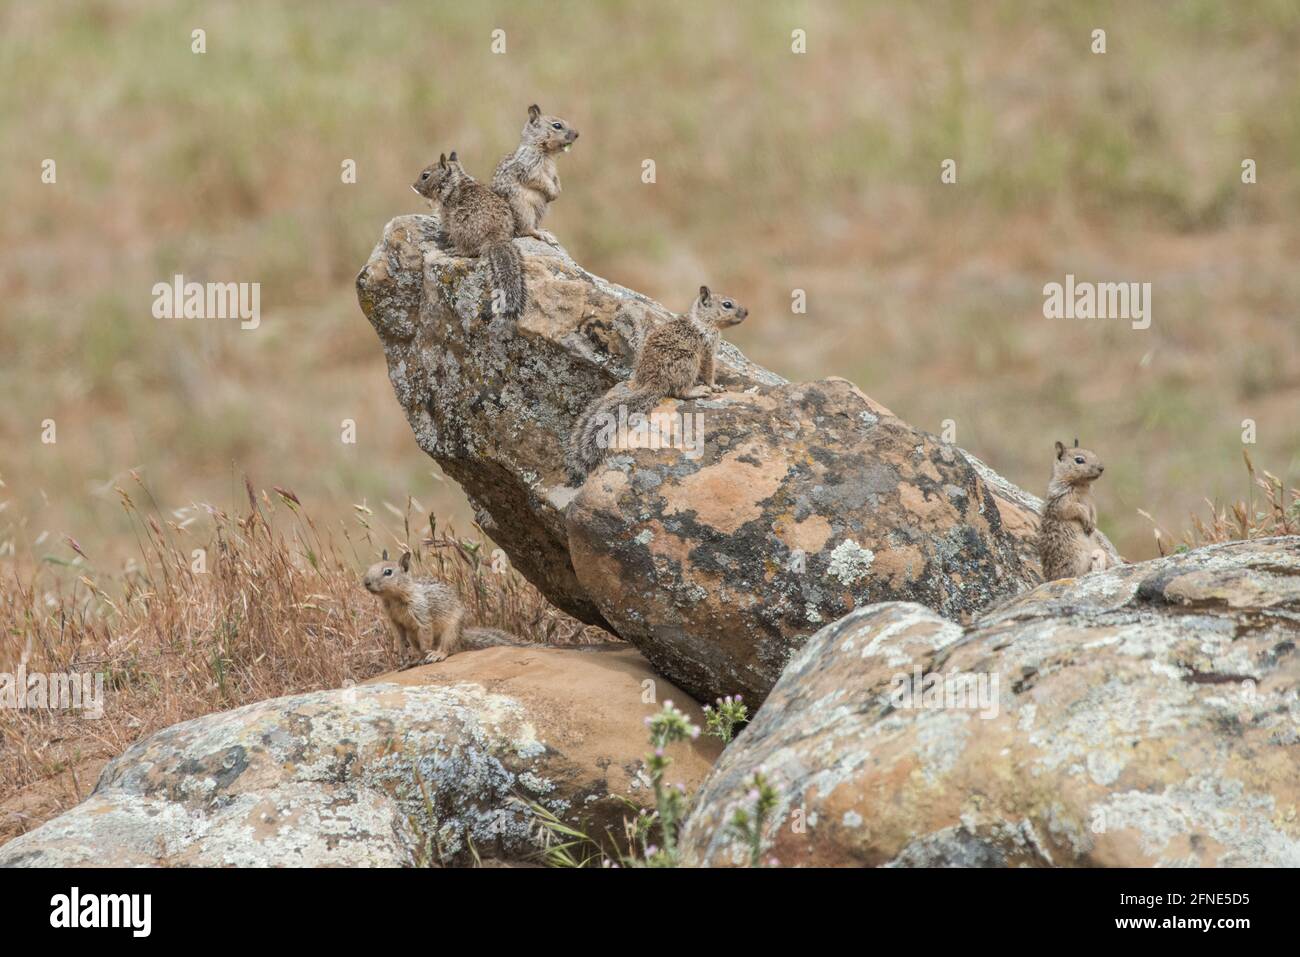 A family of California ground squirrel (Otospermophilus beecheyi) gather and rest atop boulders and rocks looking around and keeping alert for threats. Stock Photo